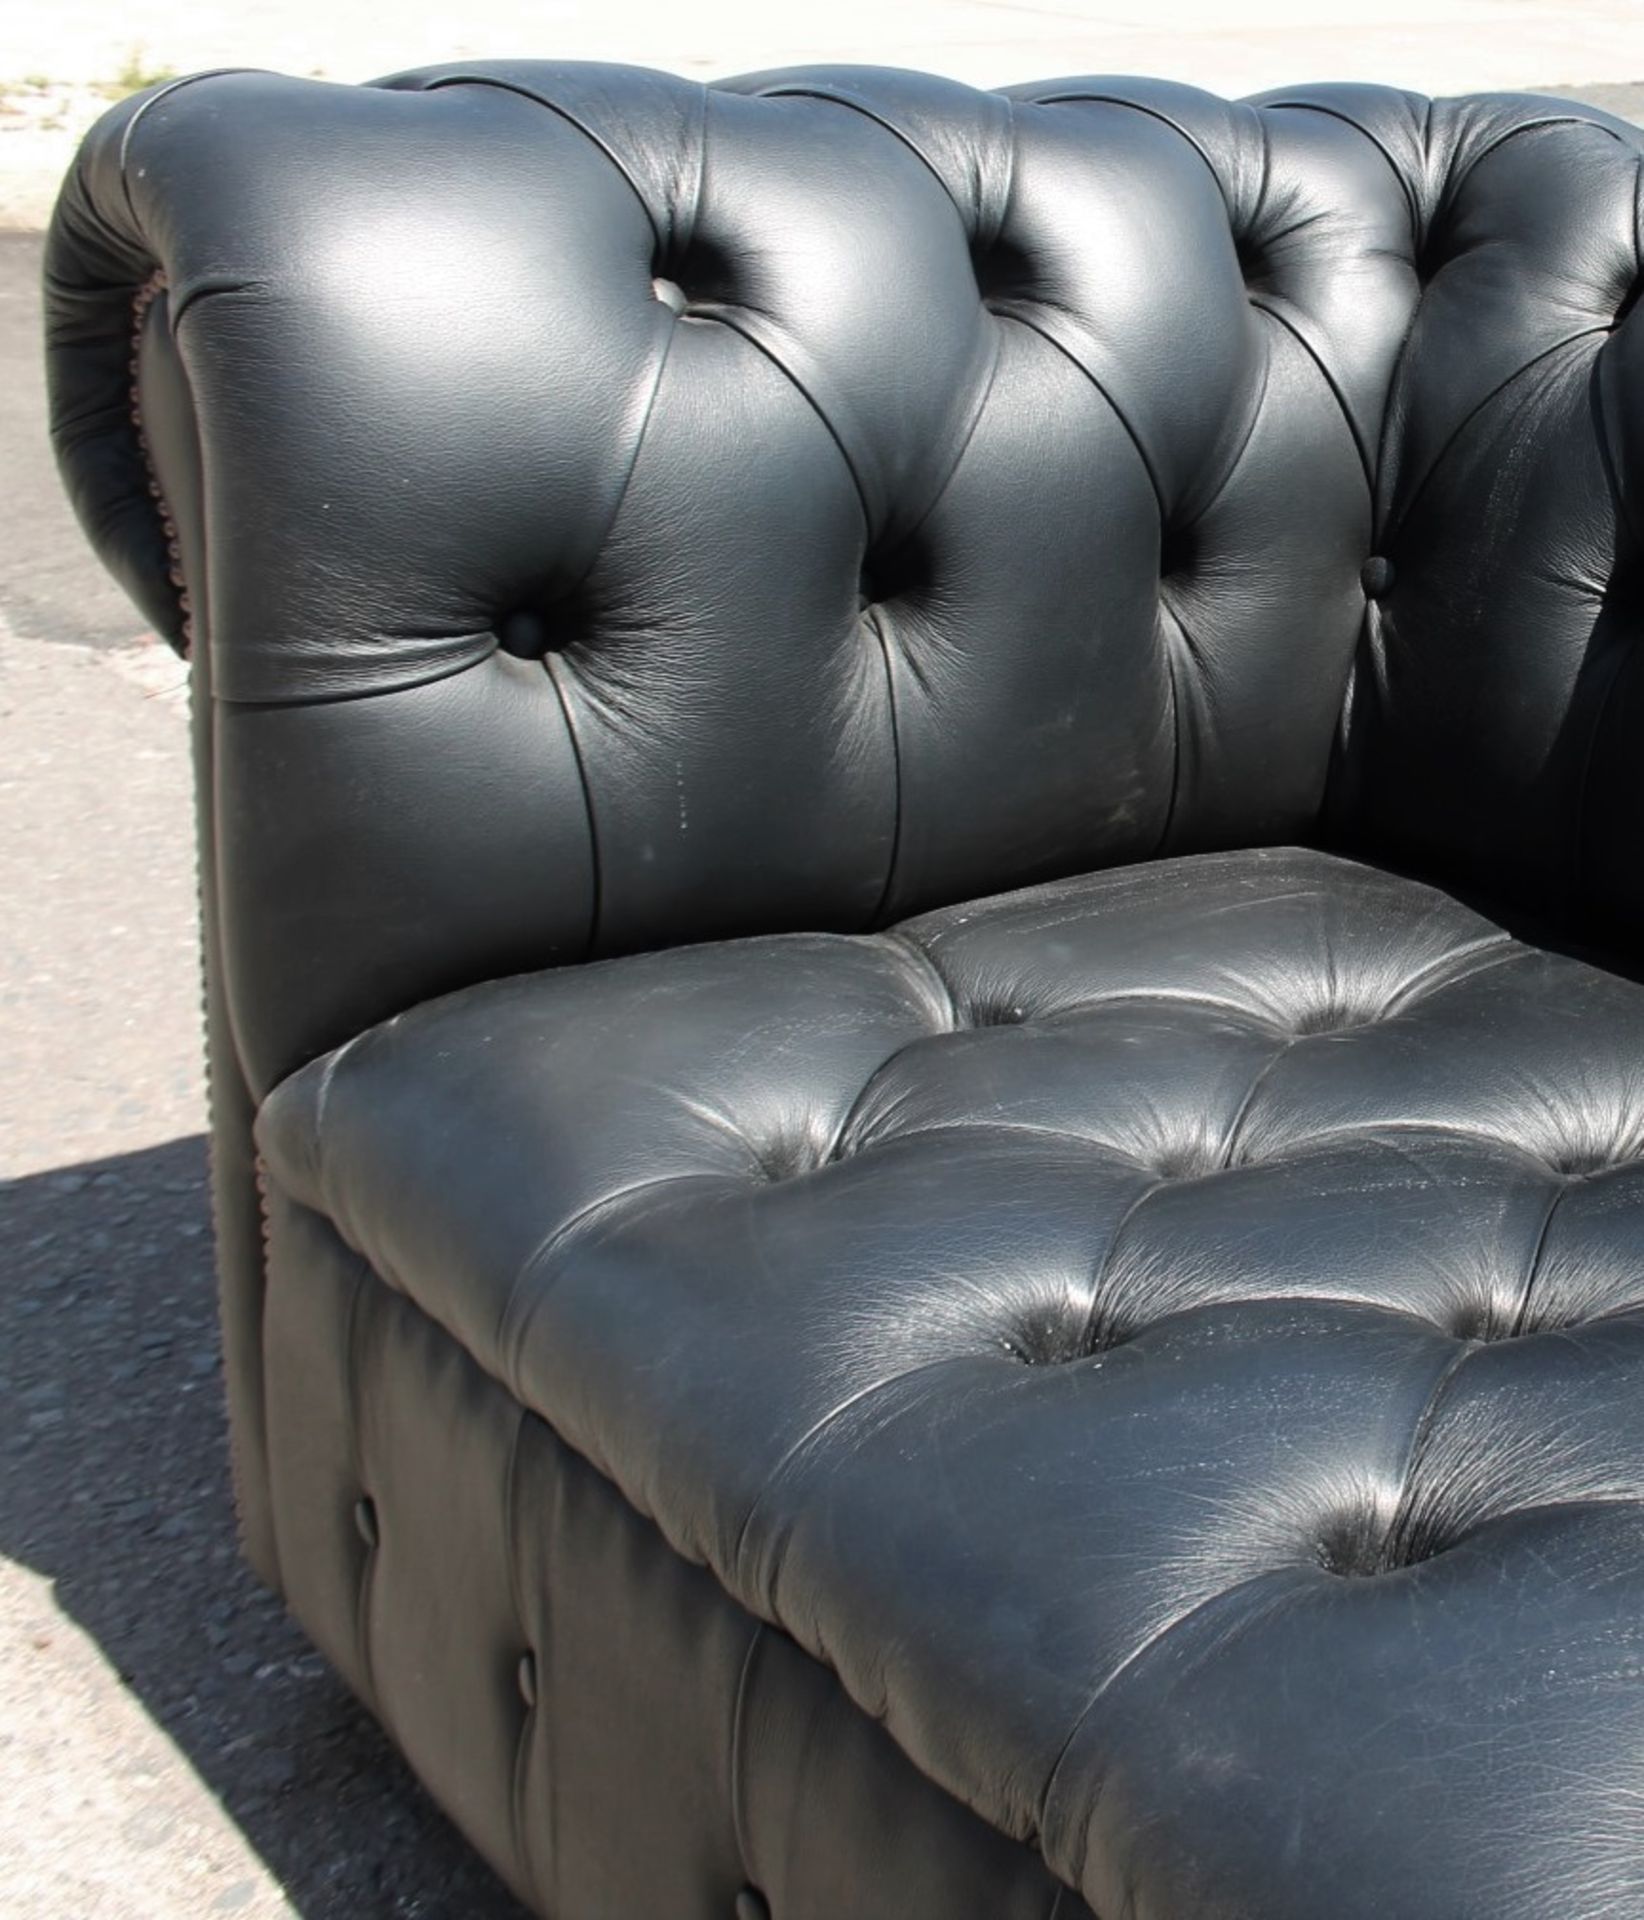 1 x Chesterfield-style 2-Metre Button-Back Sofa Upholstered In A Black Faux Leather - Image 5 of 6